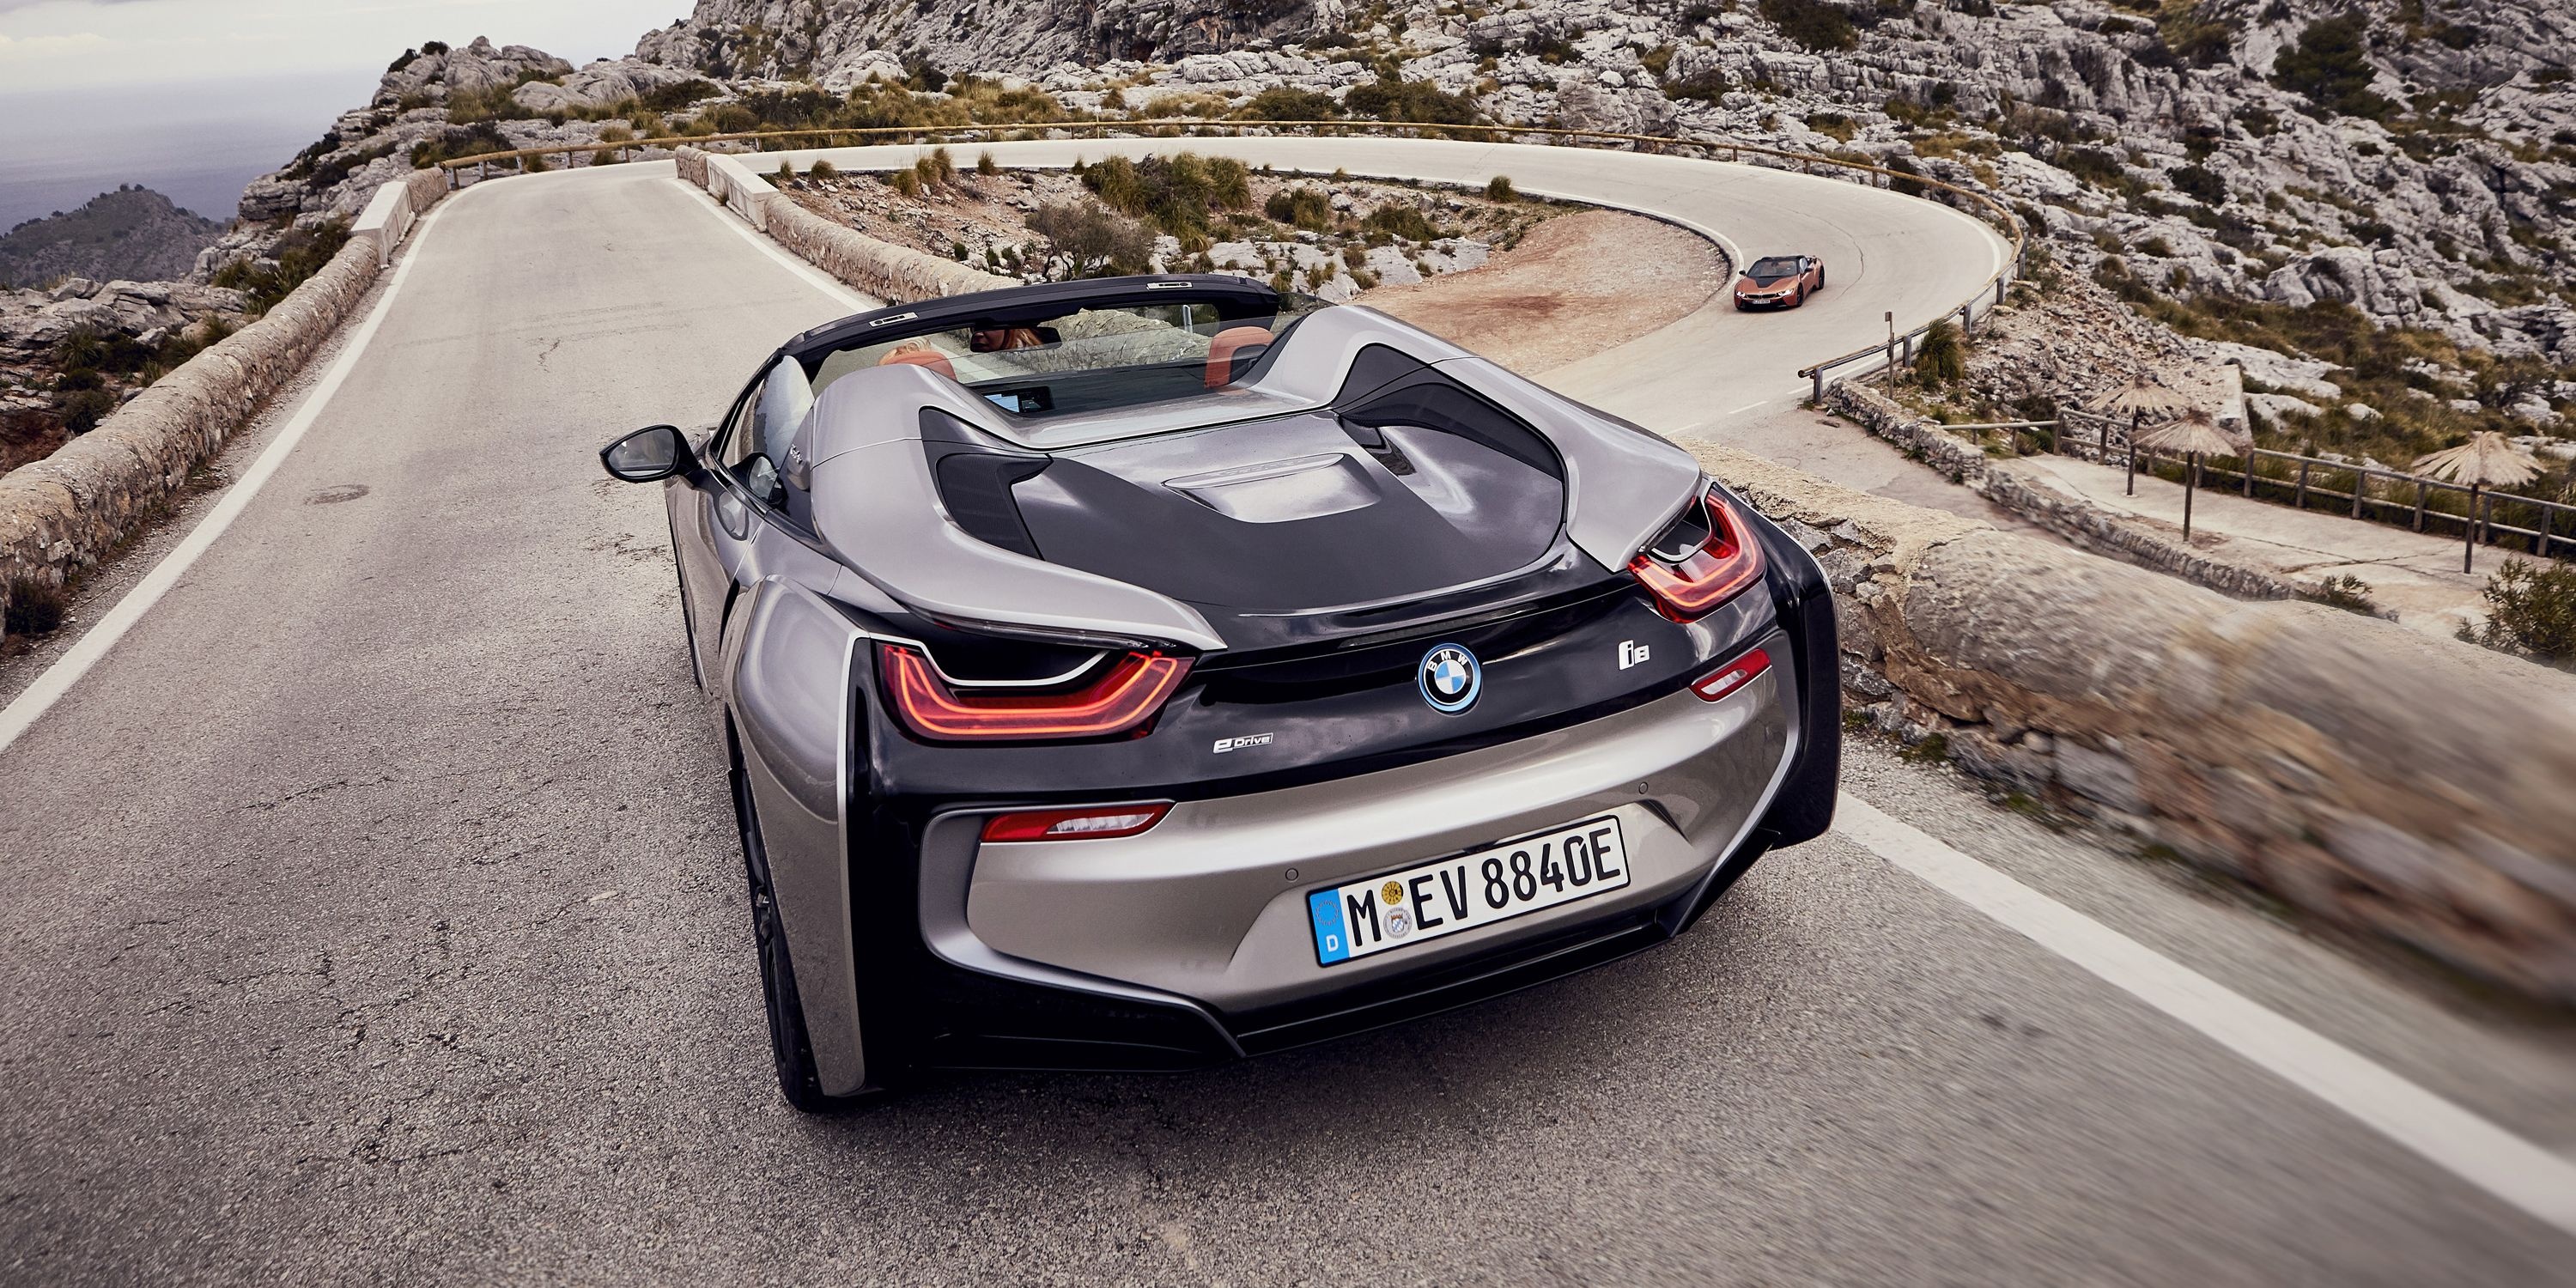 Impressive craftsmanship, BMW i8 Roadster build, Attention to detail, Meticulous construction, Artistry in motion, 3000x1500 Dual Screen Desktop